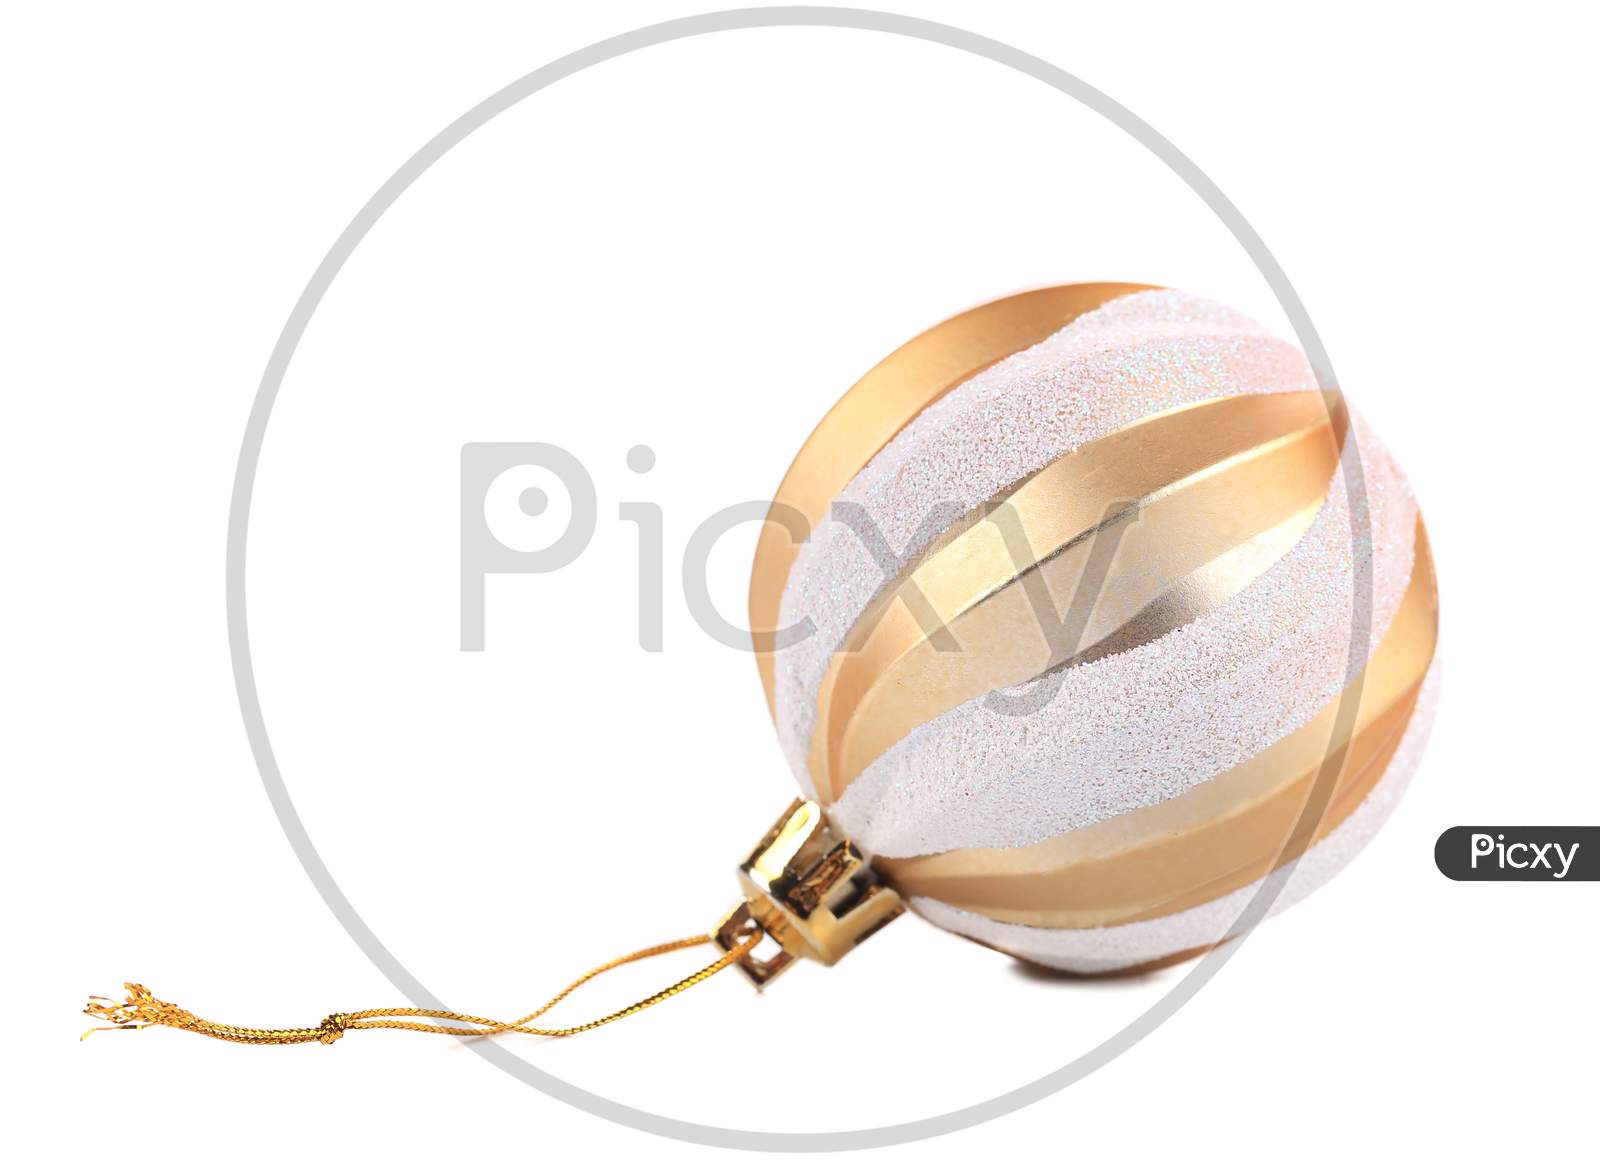 Christmas Golden Ball. Isolated On A White Background.